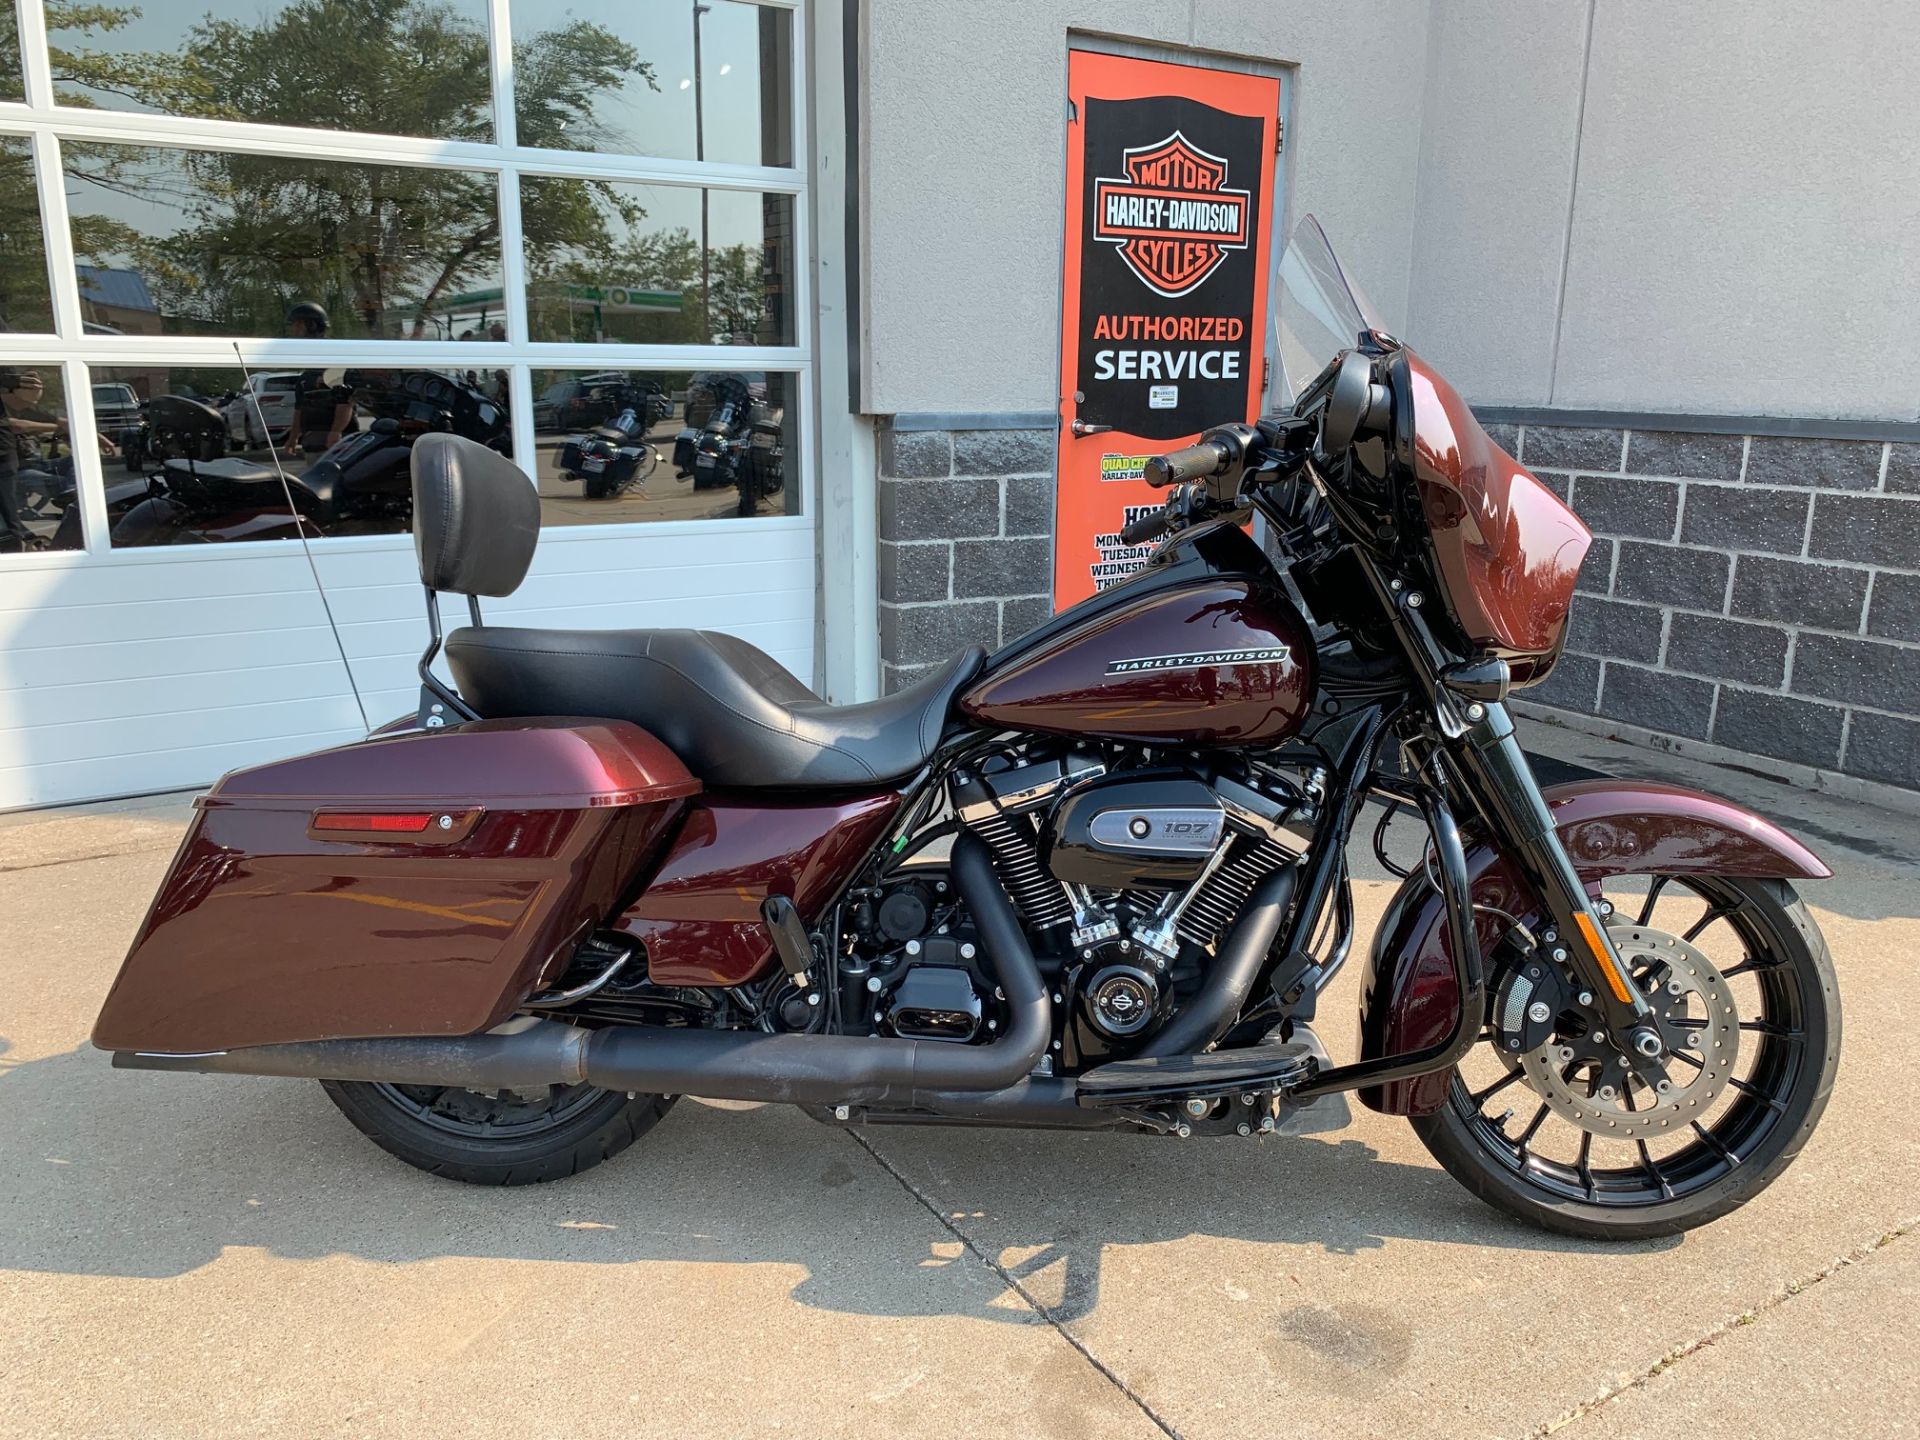 Used 2018 Harley Davidson Street Glide Special Twisted Cherry Motorcycles In Davenport Ia U647824